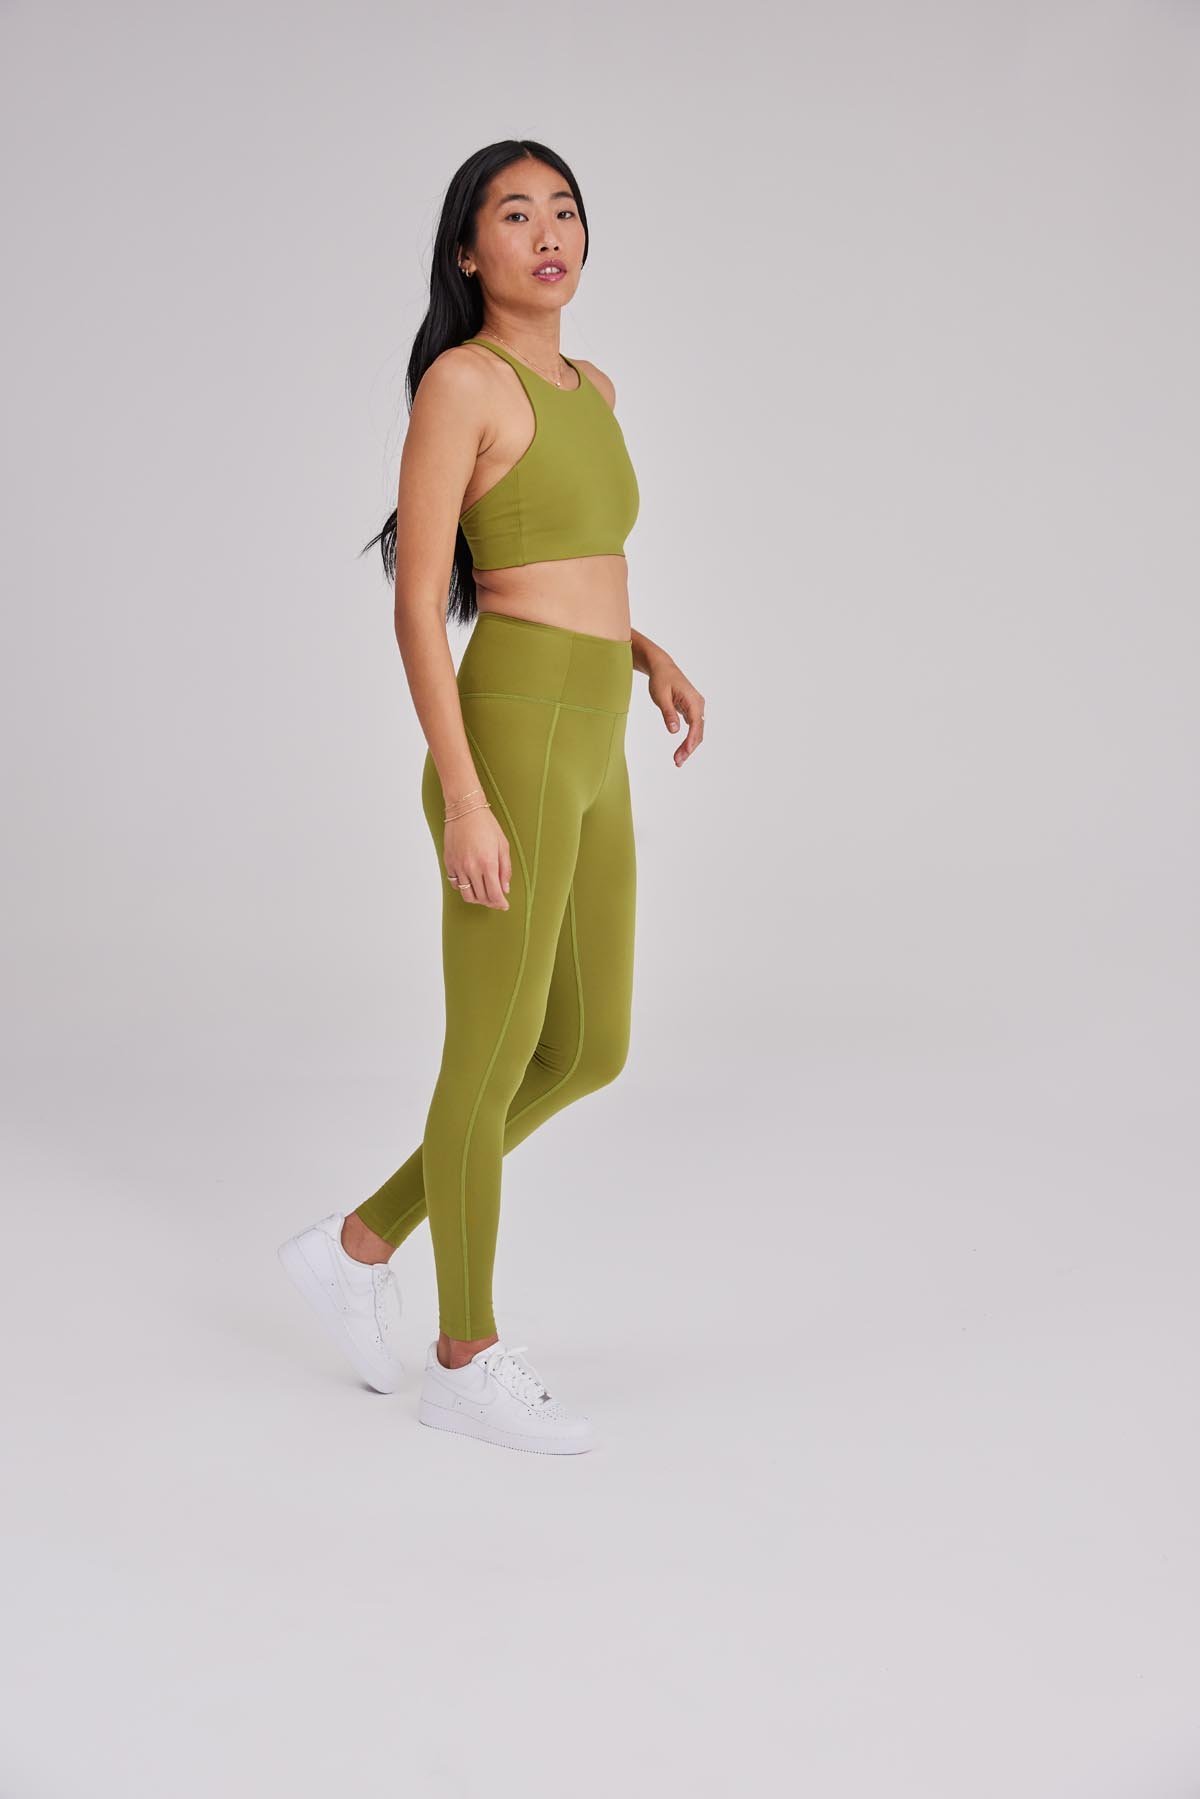 Best Pants To Wear Under Gym Leggings Uky